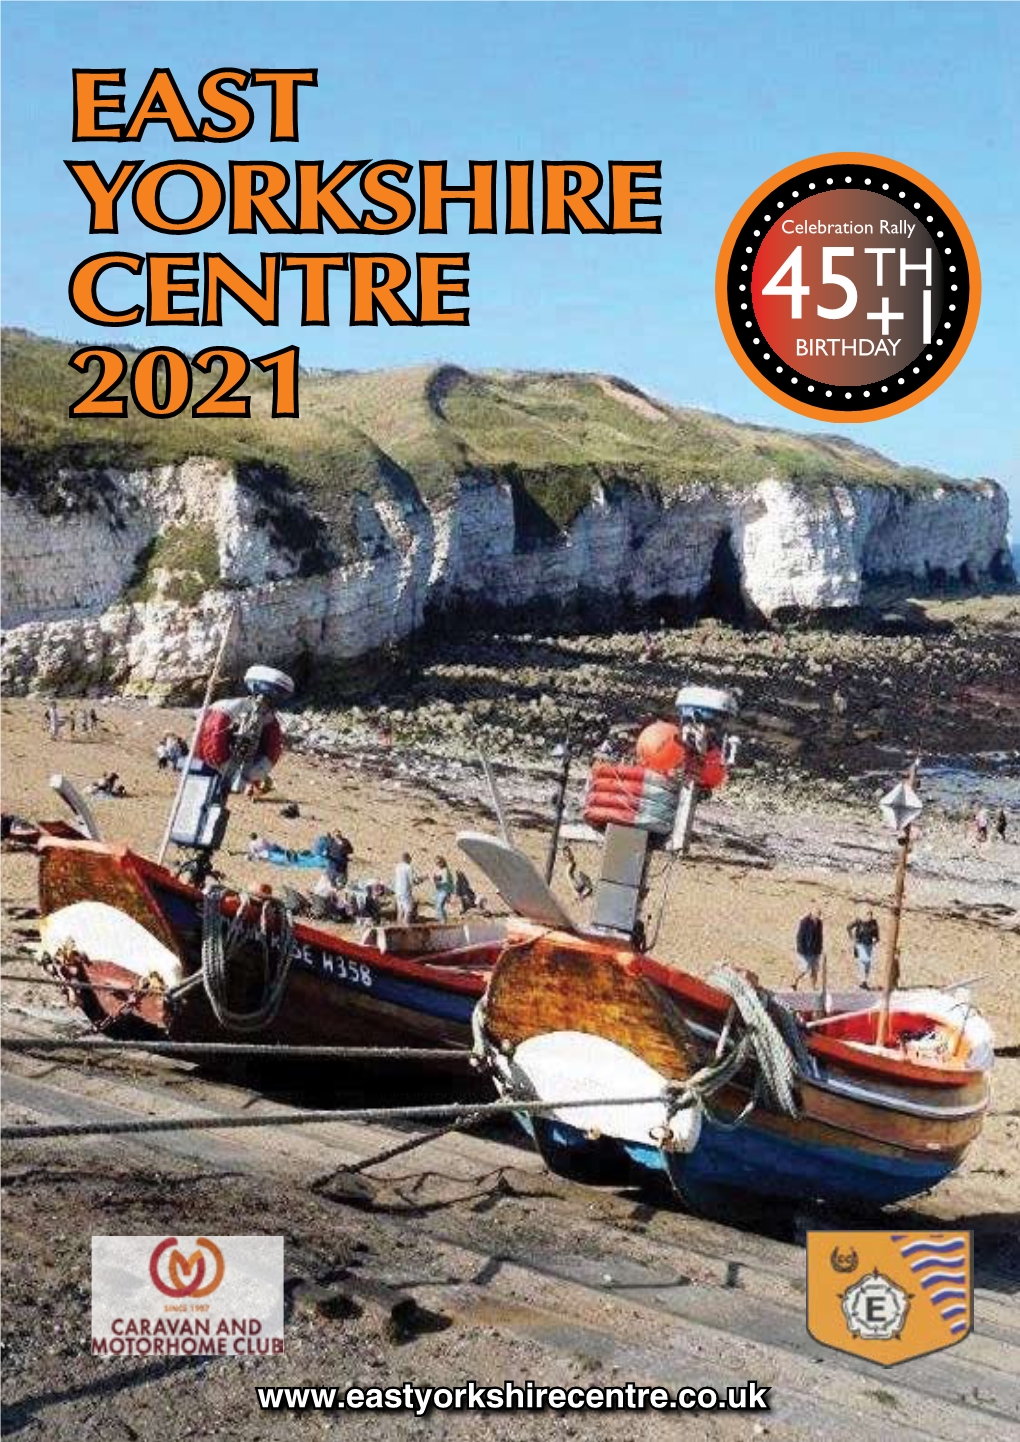 East Yorkshire Centre 2021